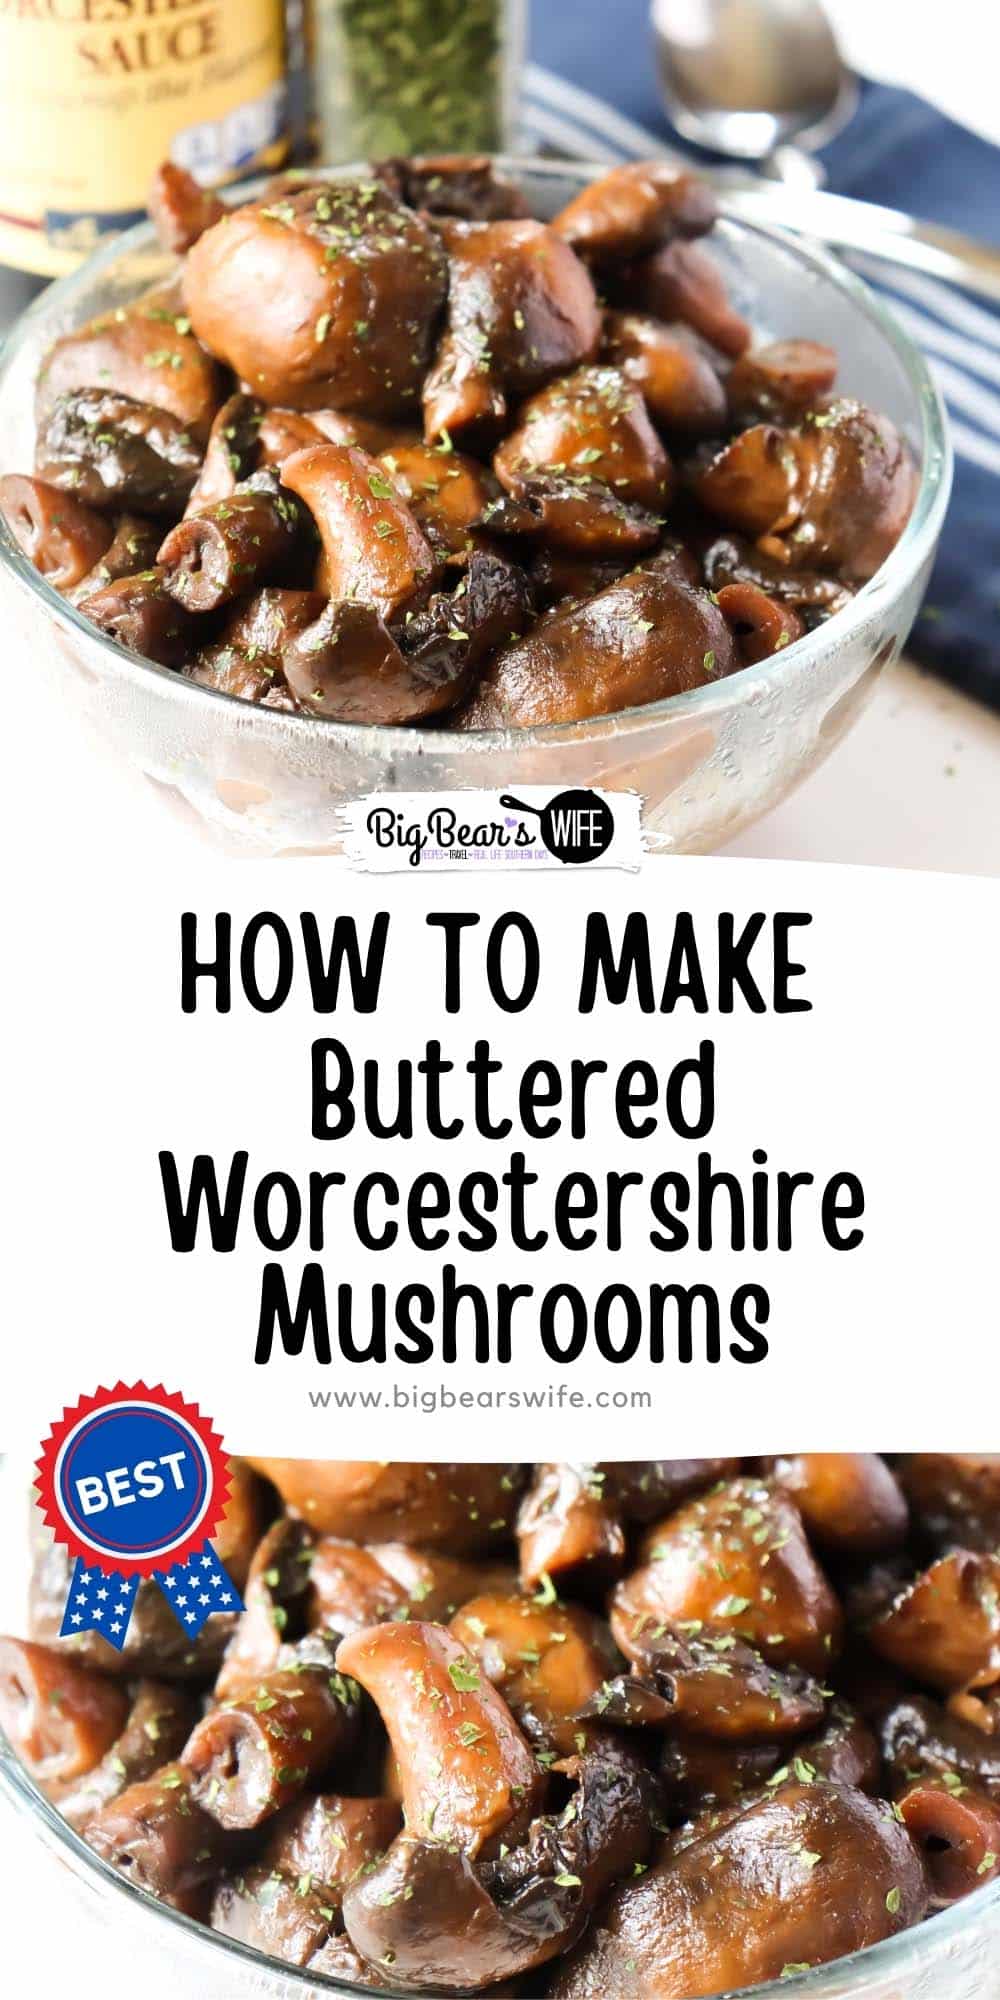 These flavorful mushrooms are cooked in butter and Worcestershire sauce until soft and delicious! Buttered Worcestershire Mushrooms are the perfect for a side dish with chicken, steak, burgers or fish! via @bigbearswife